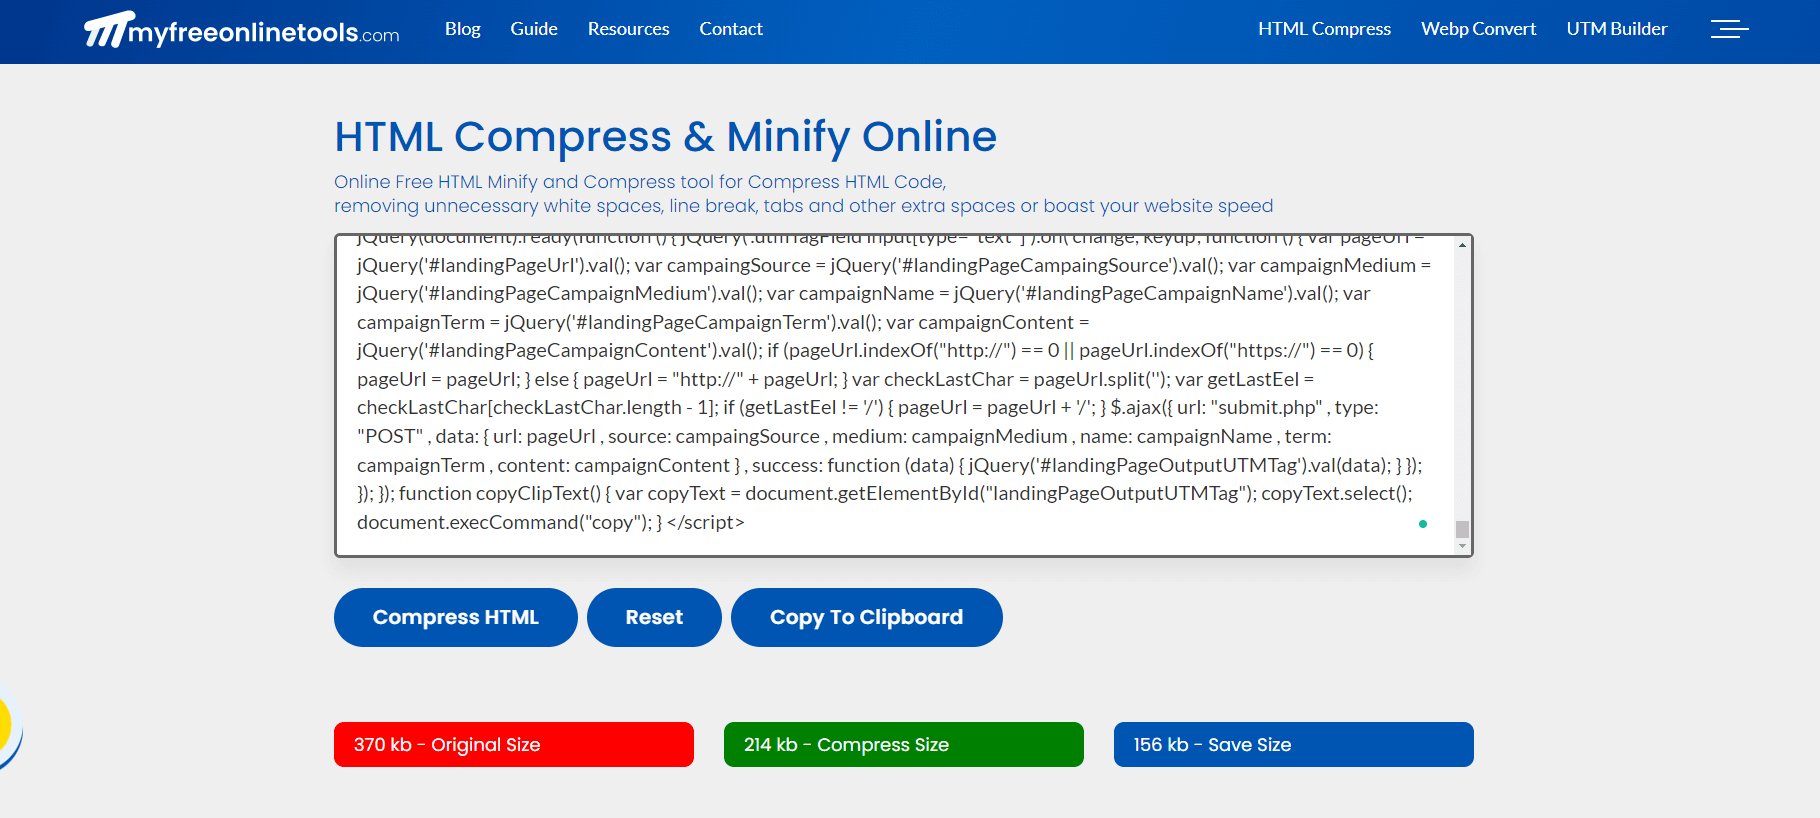 HTML Compress and Minify Online